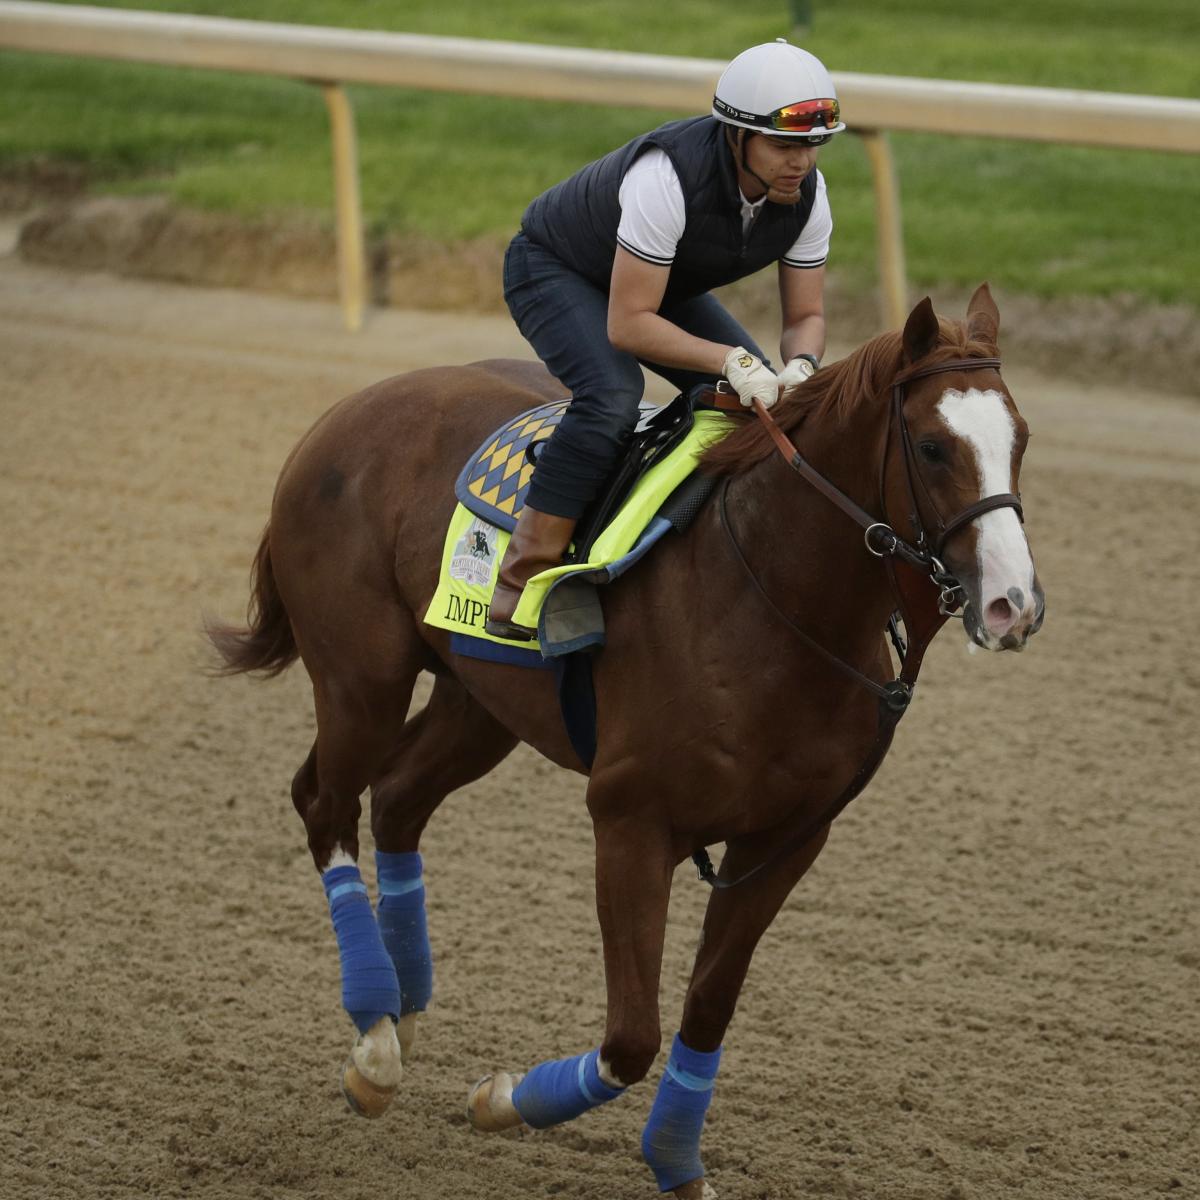 Kentucky Derby 2019 Post Positions Field Info, Horses Odds and